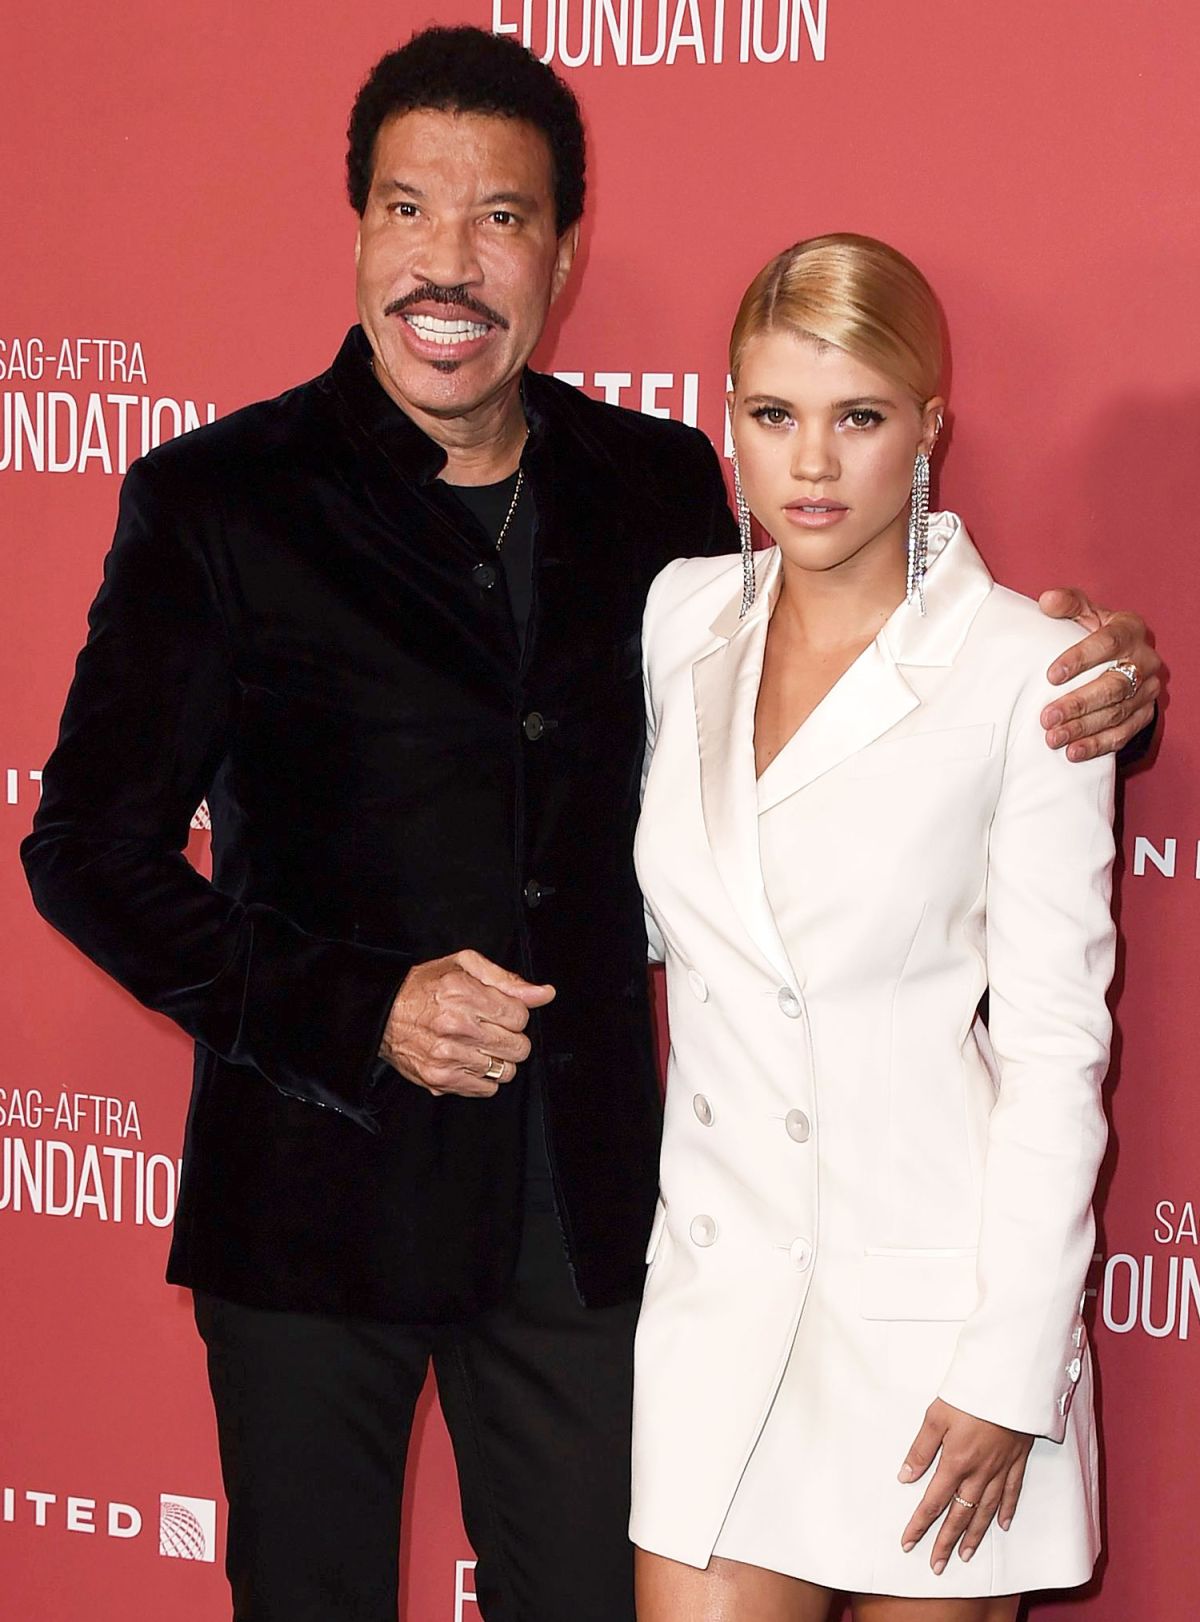 Sofia Richie is given hot pink Birkin bag by dad Lionel